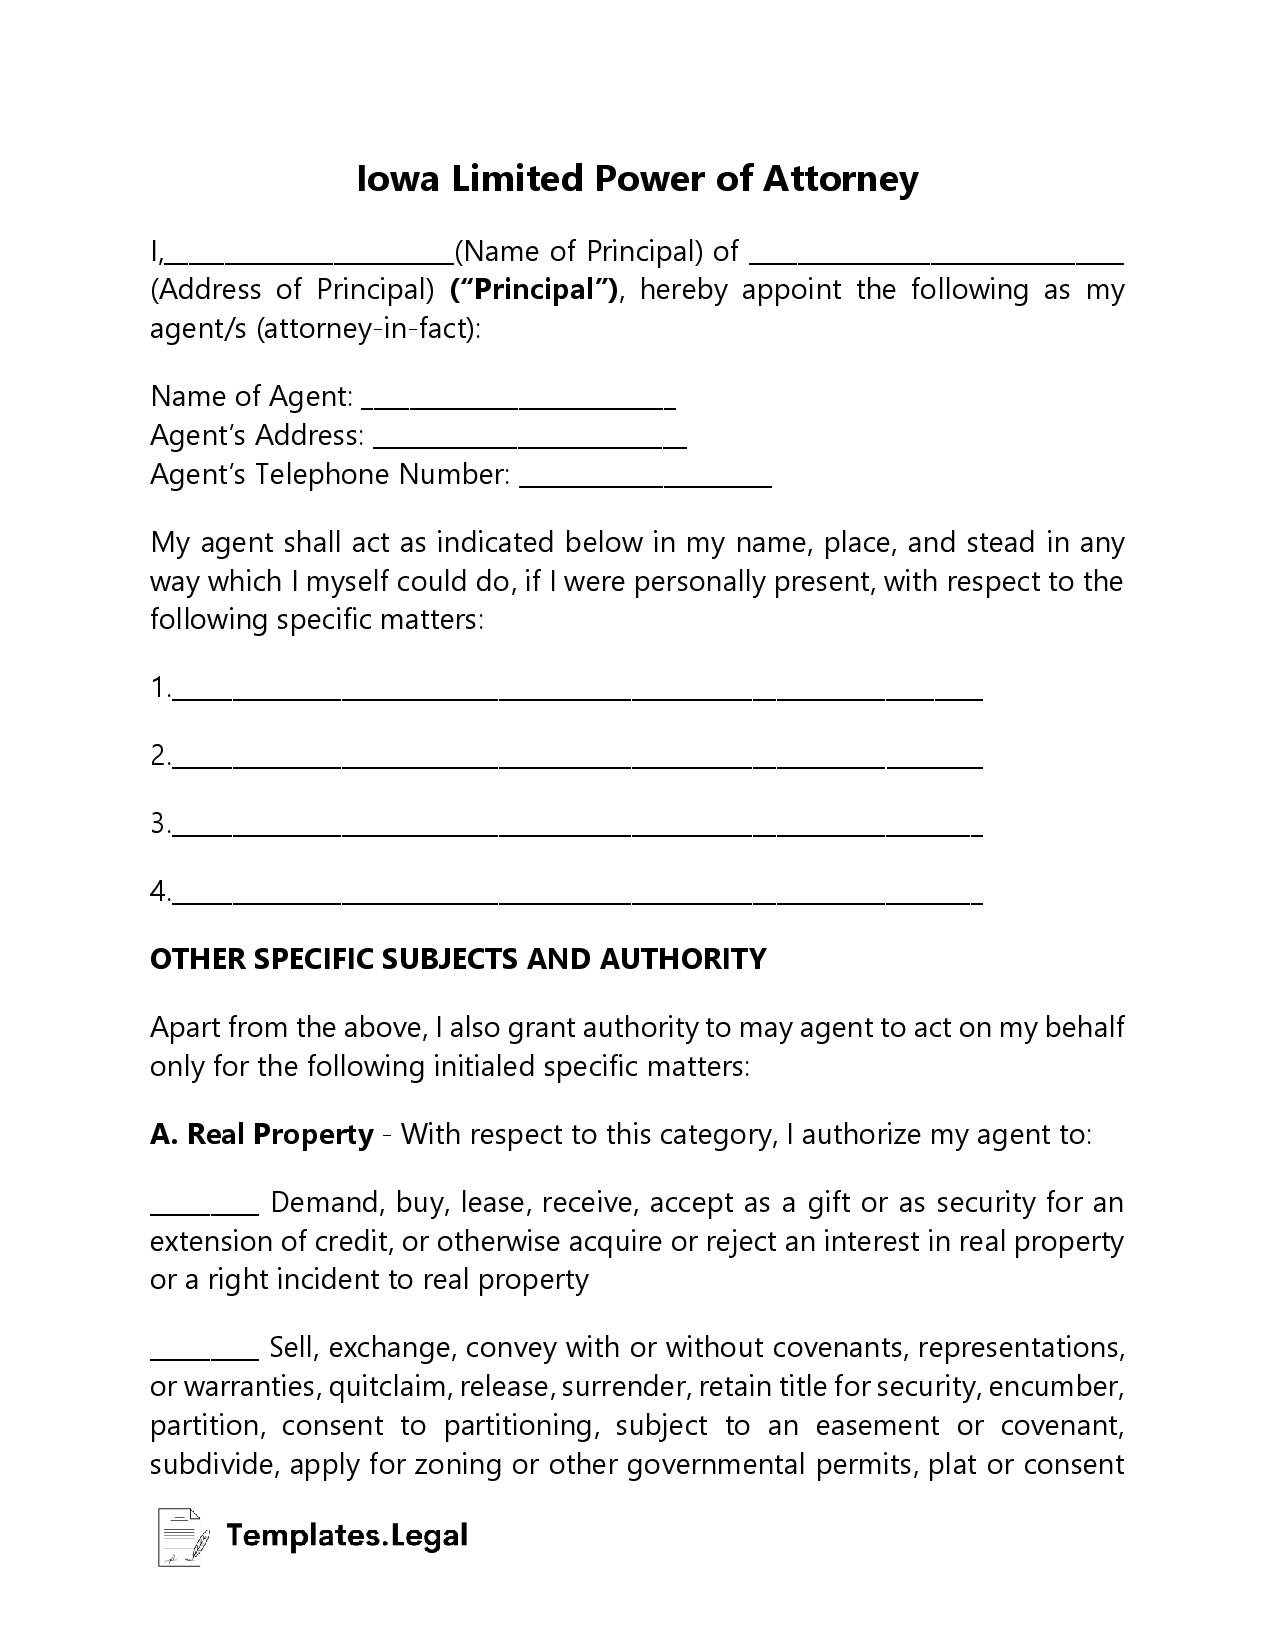 Iowa Limited Power of Attorney - Templates.Legal